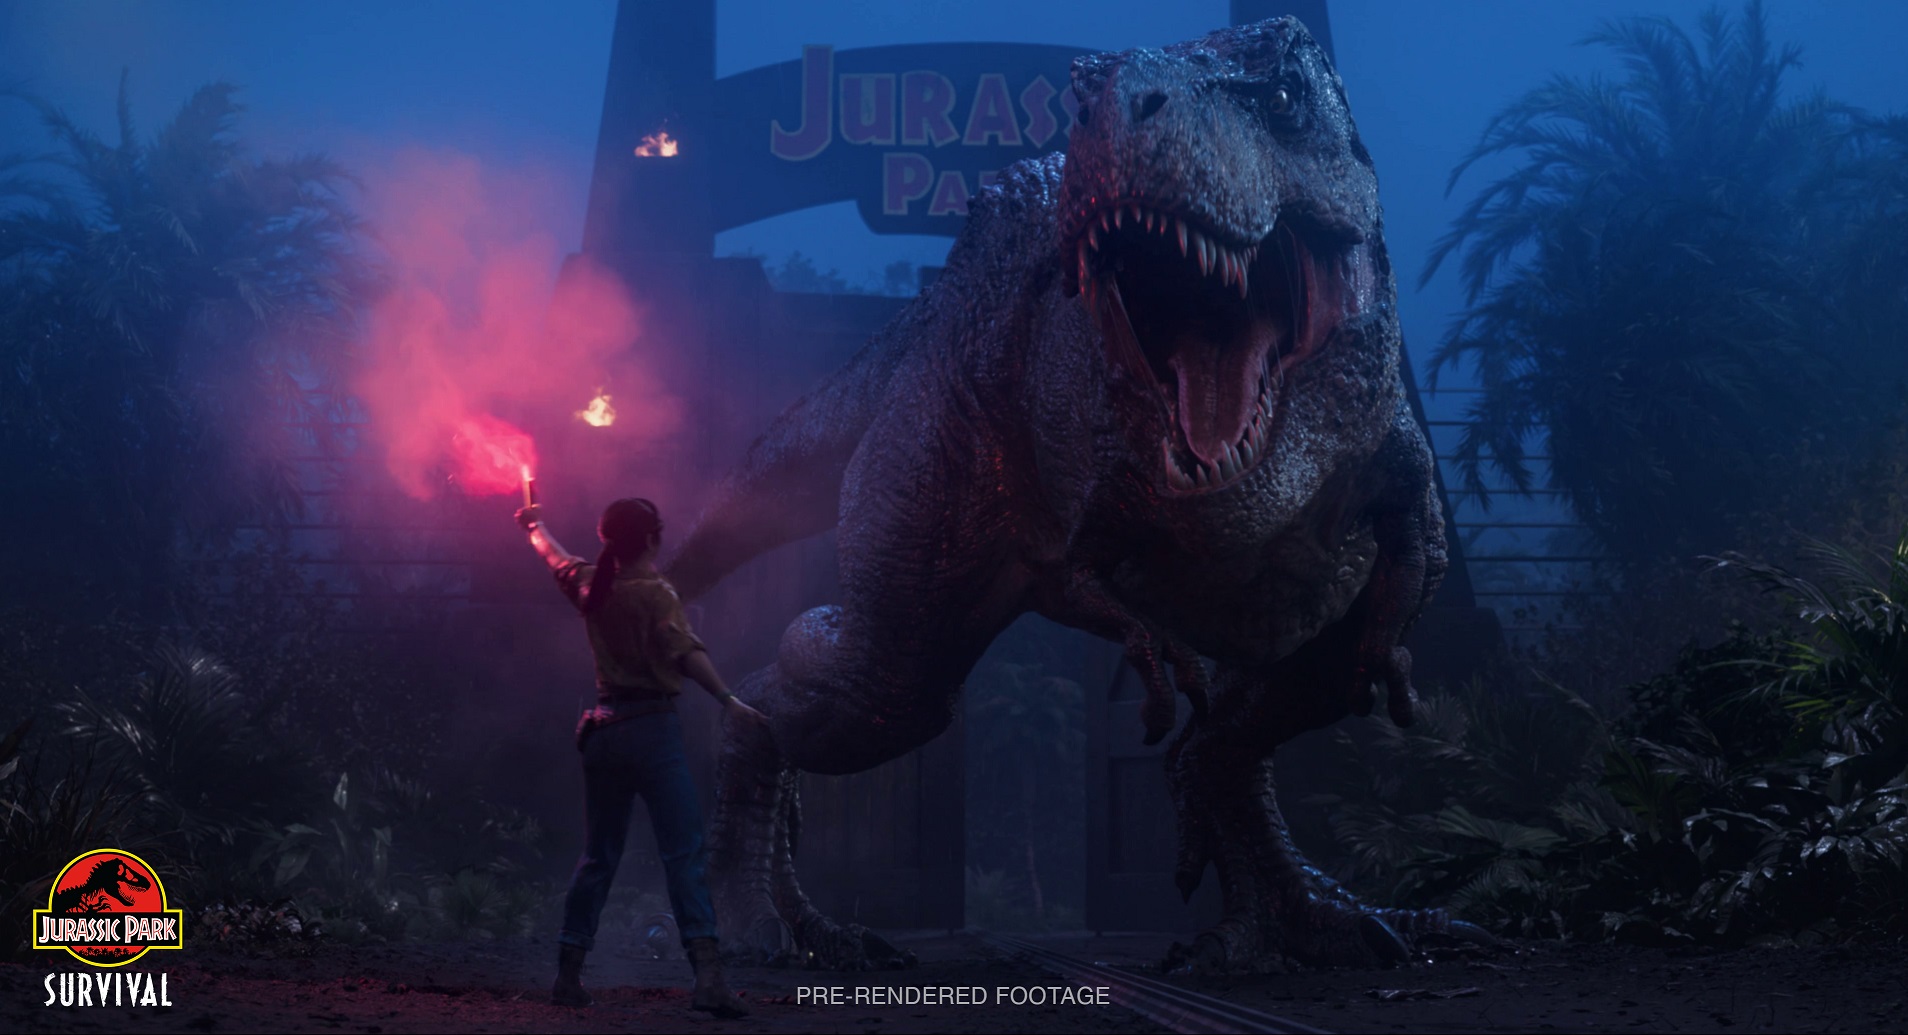 Jurassic Park: Survival is set the day after the original Jurassic Park